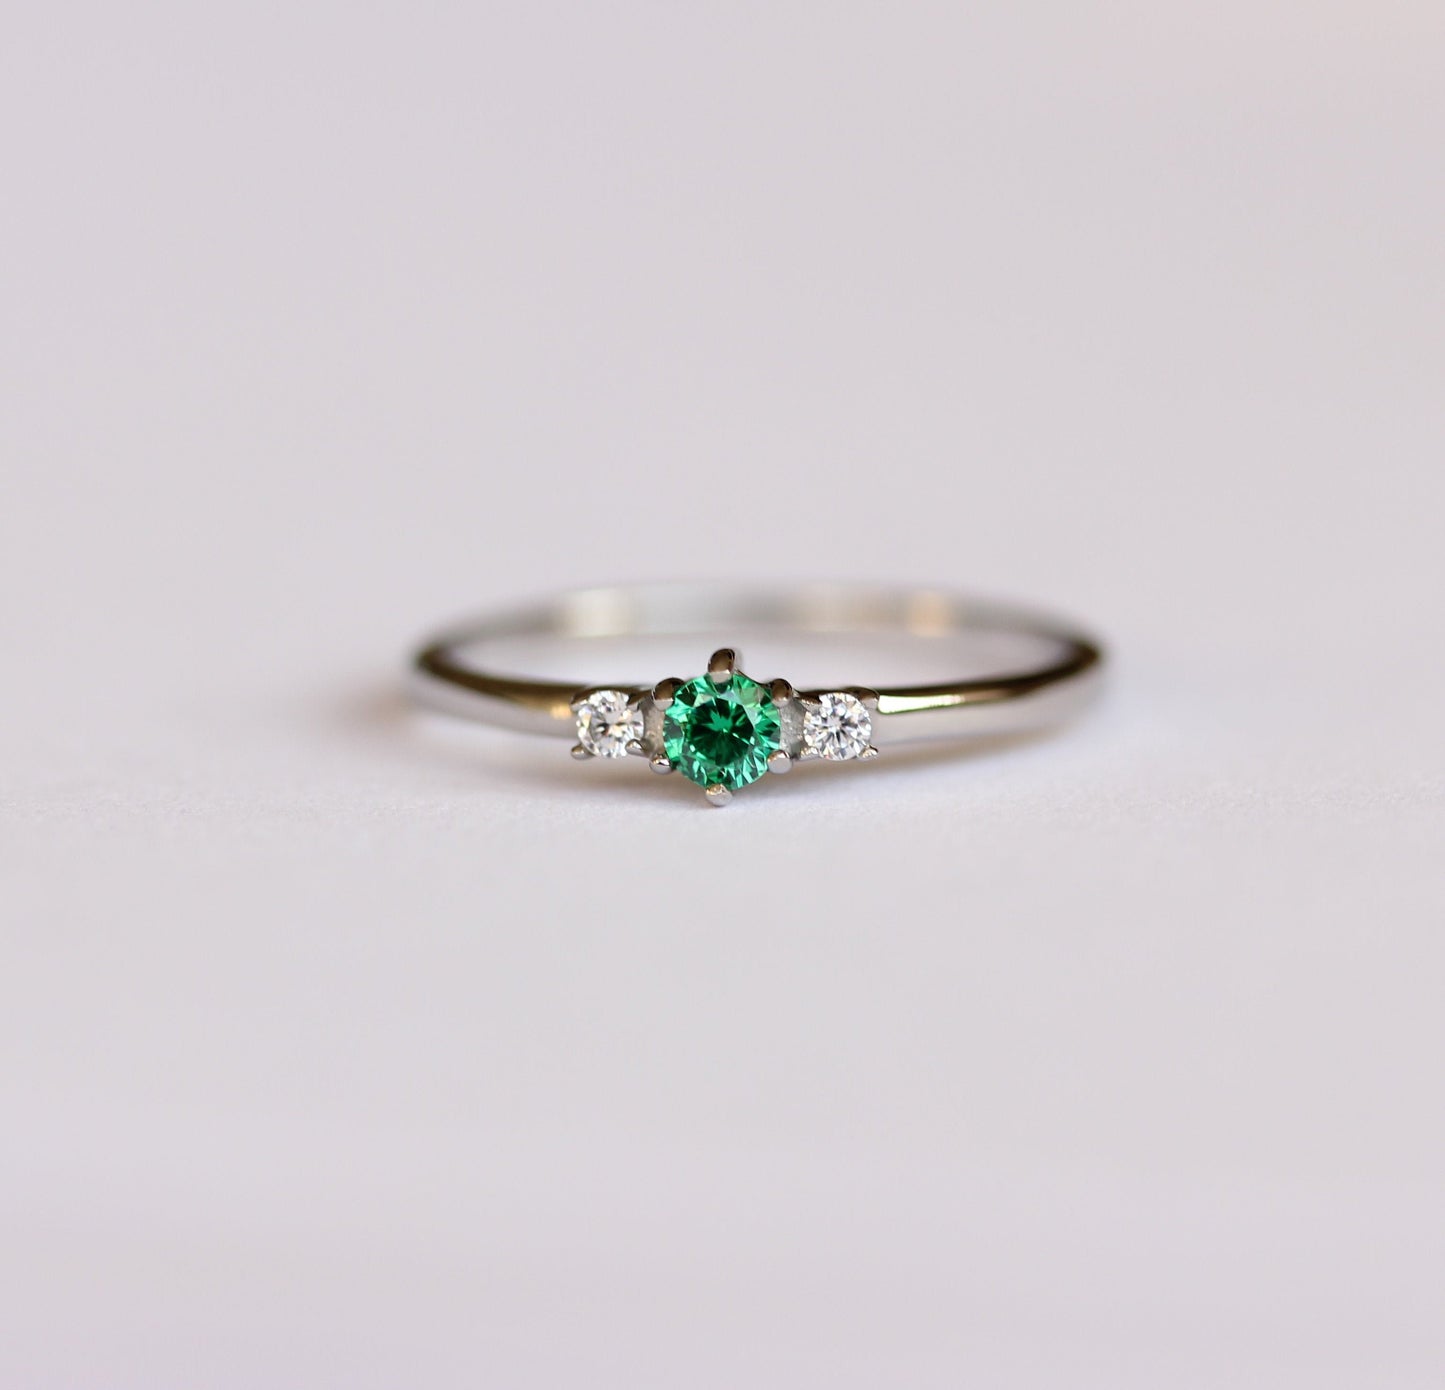 Natural Emerald and White Sapphire 3 Stone Trilogy Ring in White Gold Filled or Titanium  - Engagement Ring - Handmade Ring